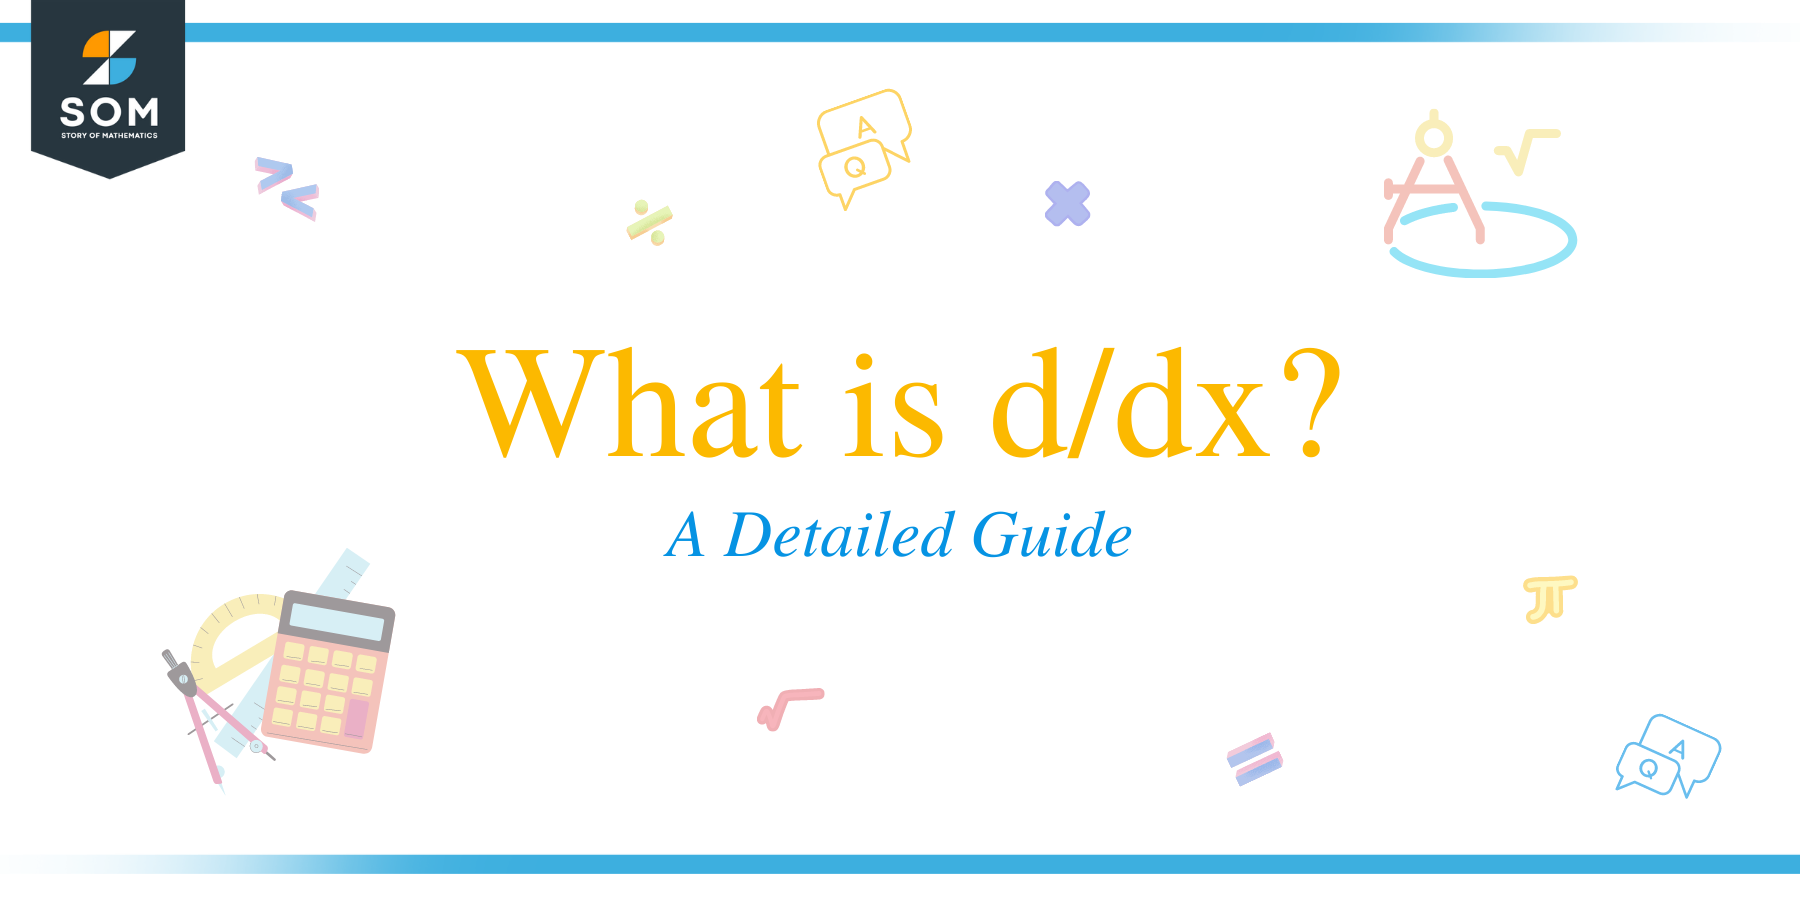 What is d/dx?